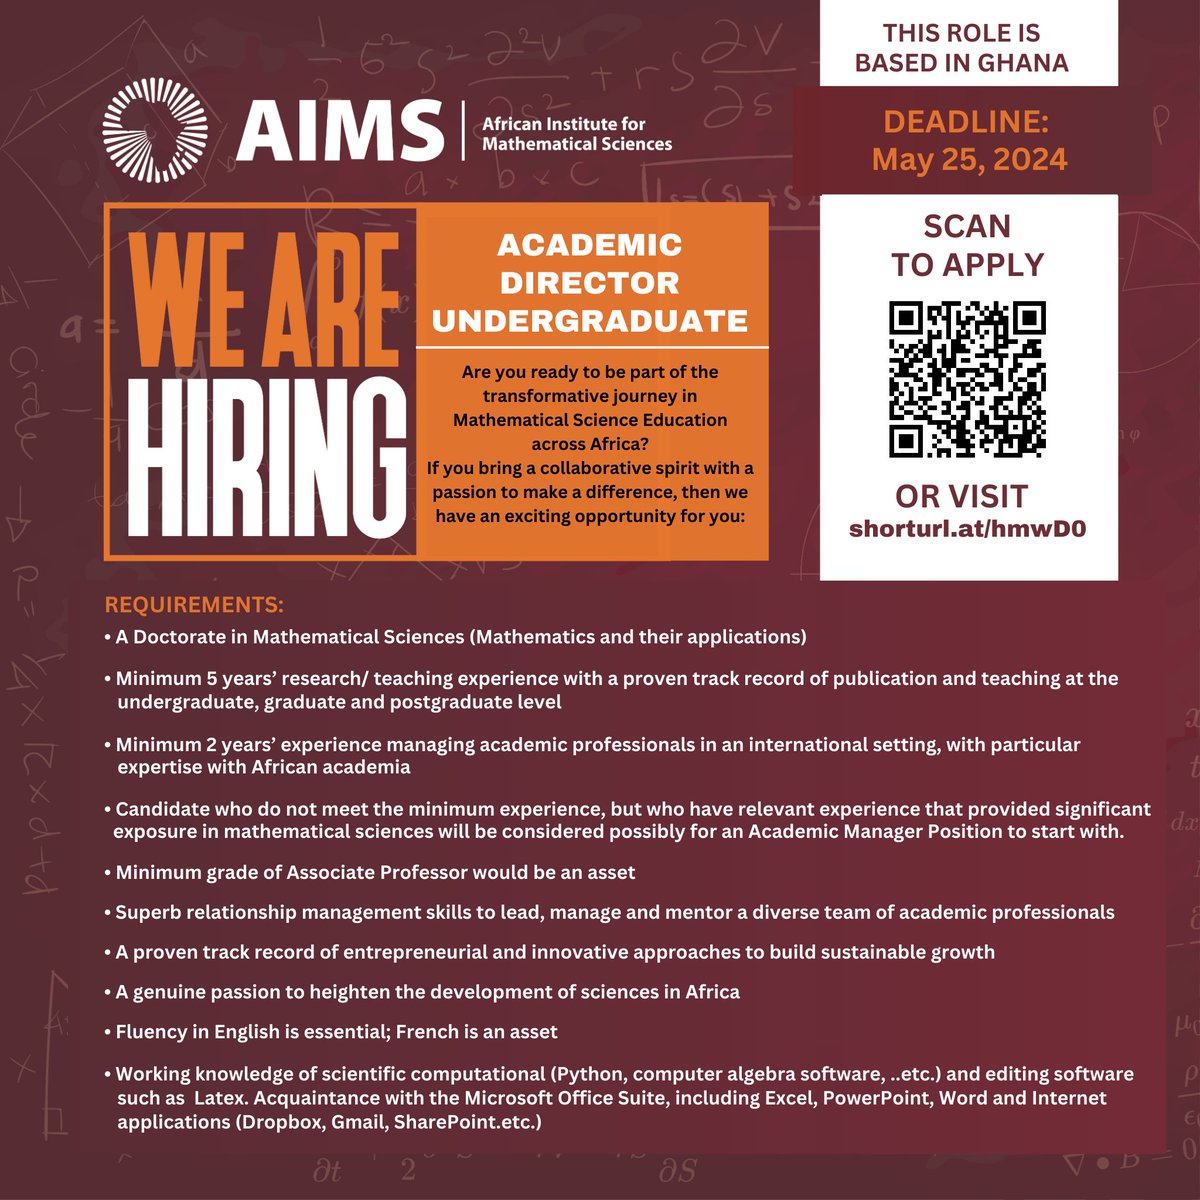 📢#HiringNow - Do you have a fervor for leadership and a desire to make a difference in higher education at AIMS? We’re on the lookout for an “Academic Director - Undergraduate” Submit your application today: shorturl.at/hmwD0 Application closes on: May 25th, 2024